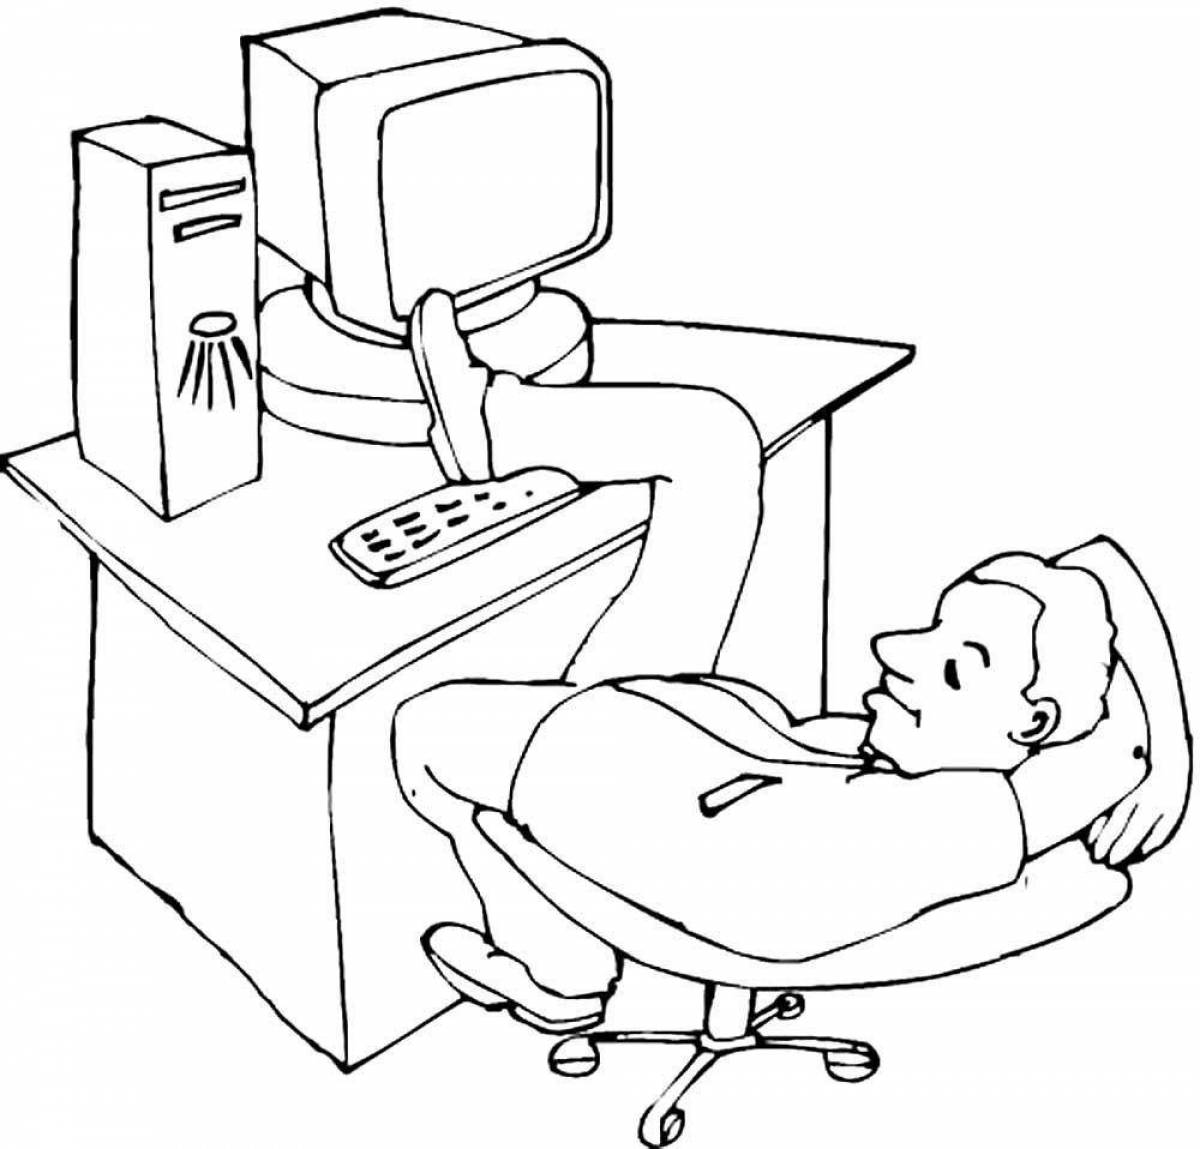 Animated programmer coloring page